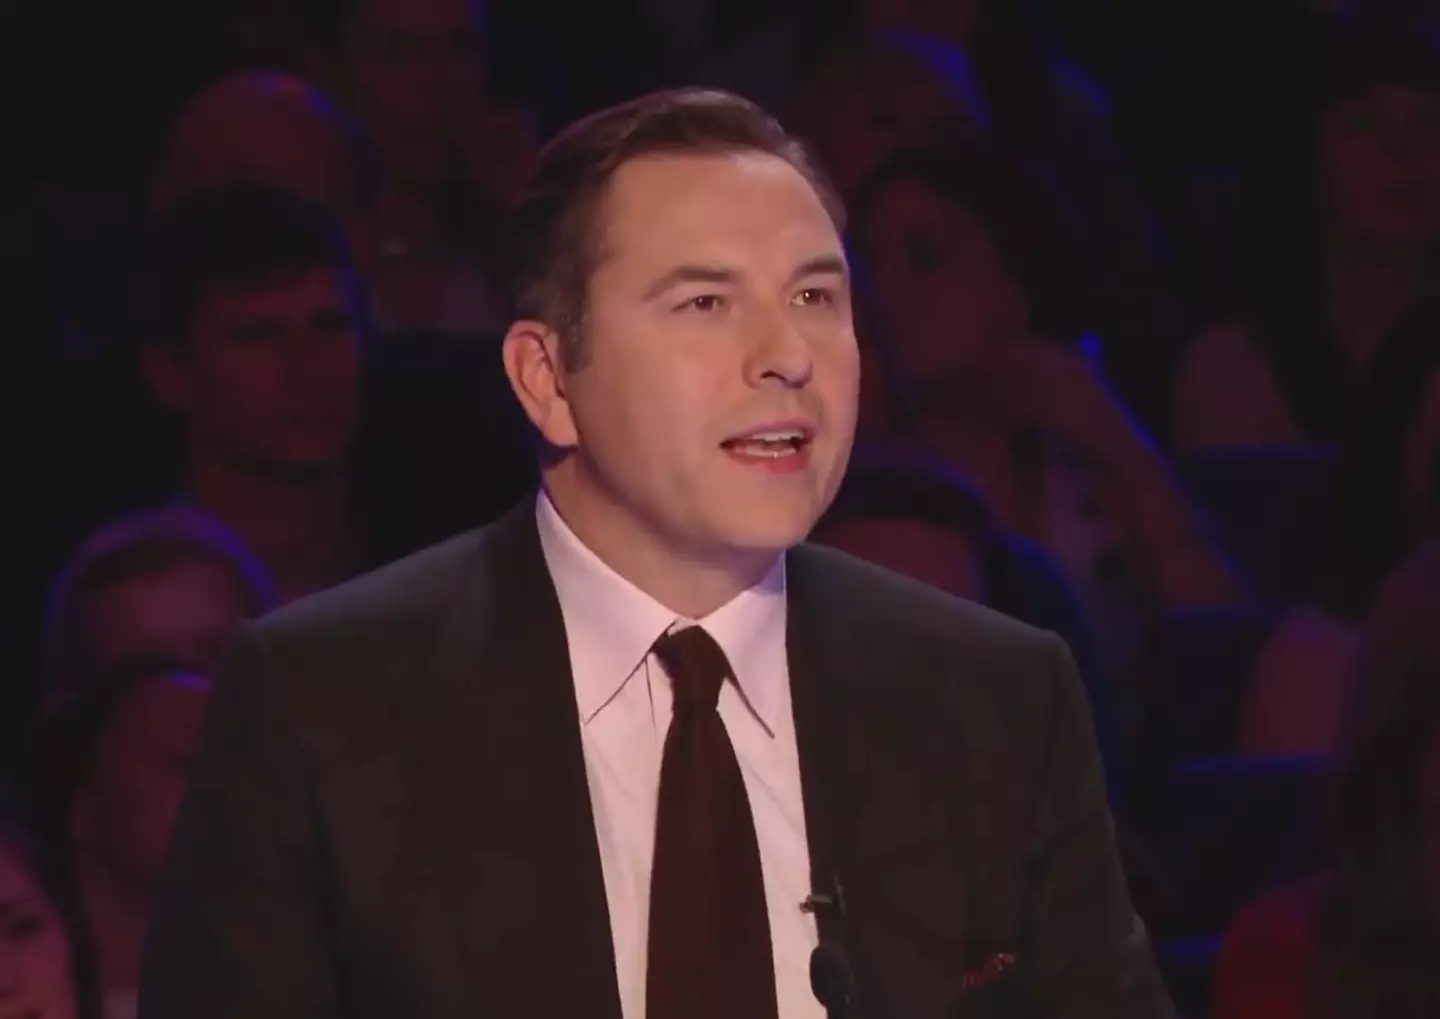 Walliams worked on the show for a decade.